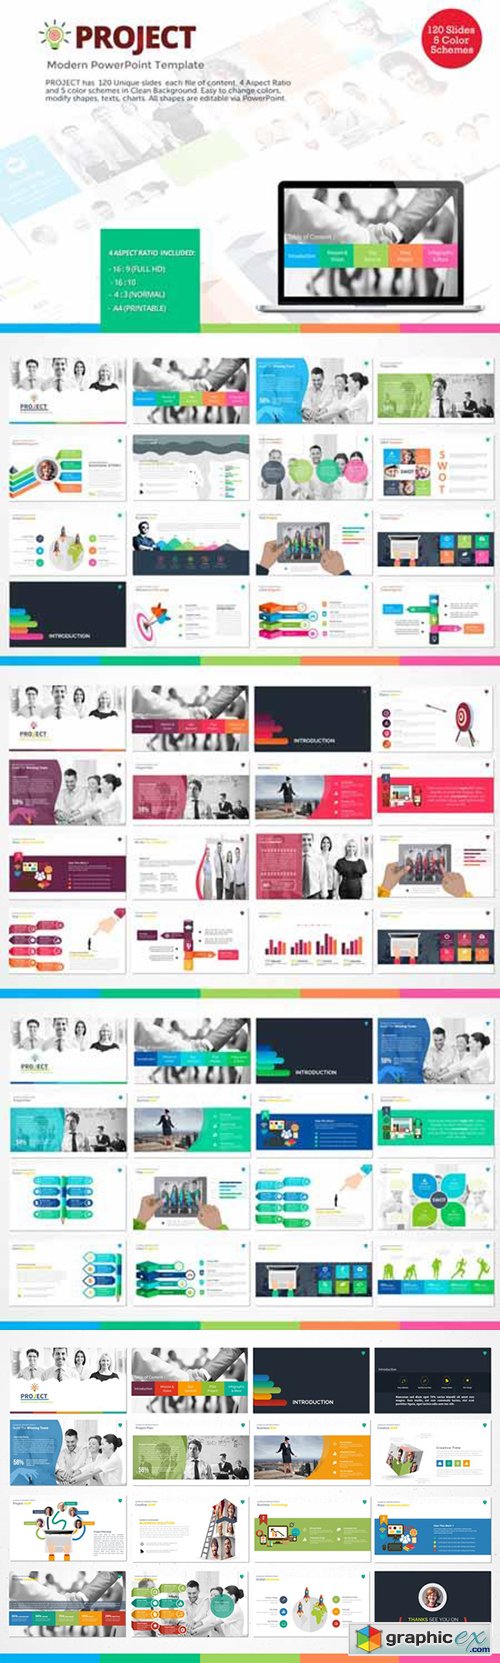  Project - Modern PowerPoint Template